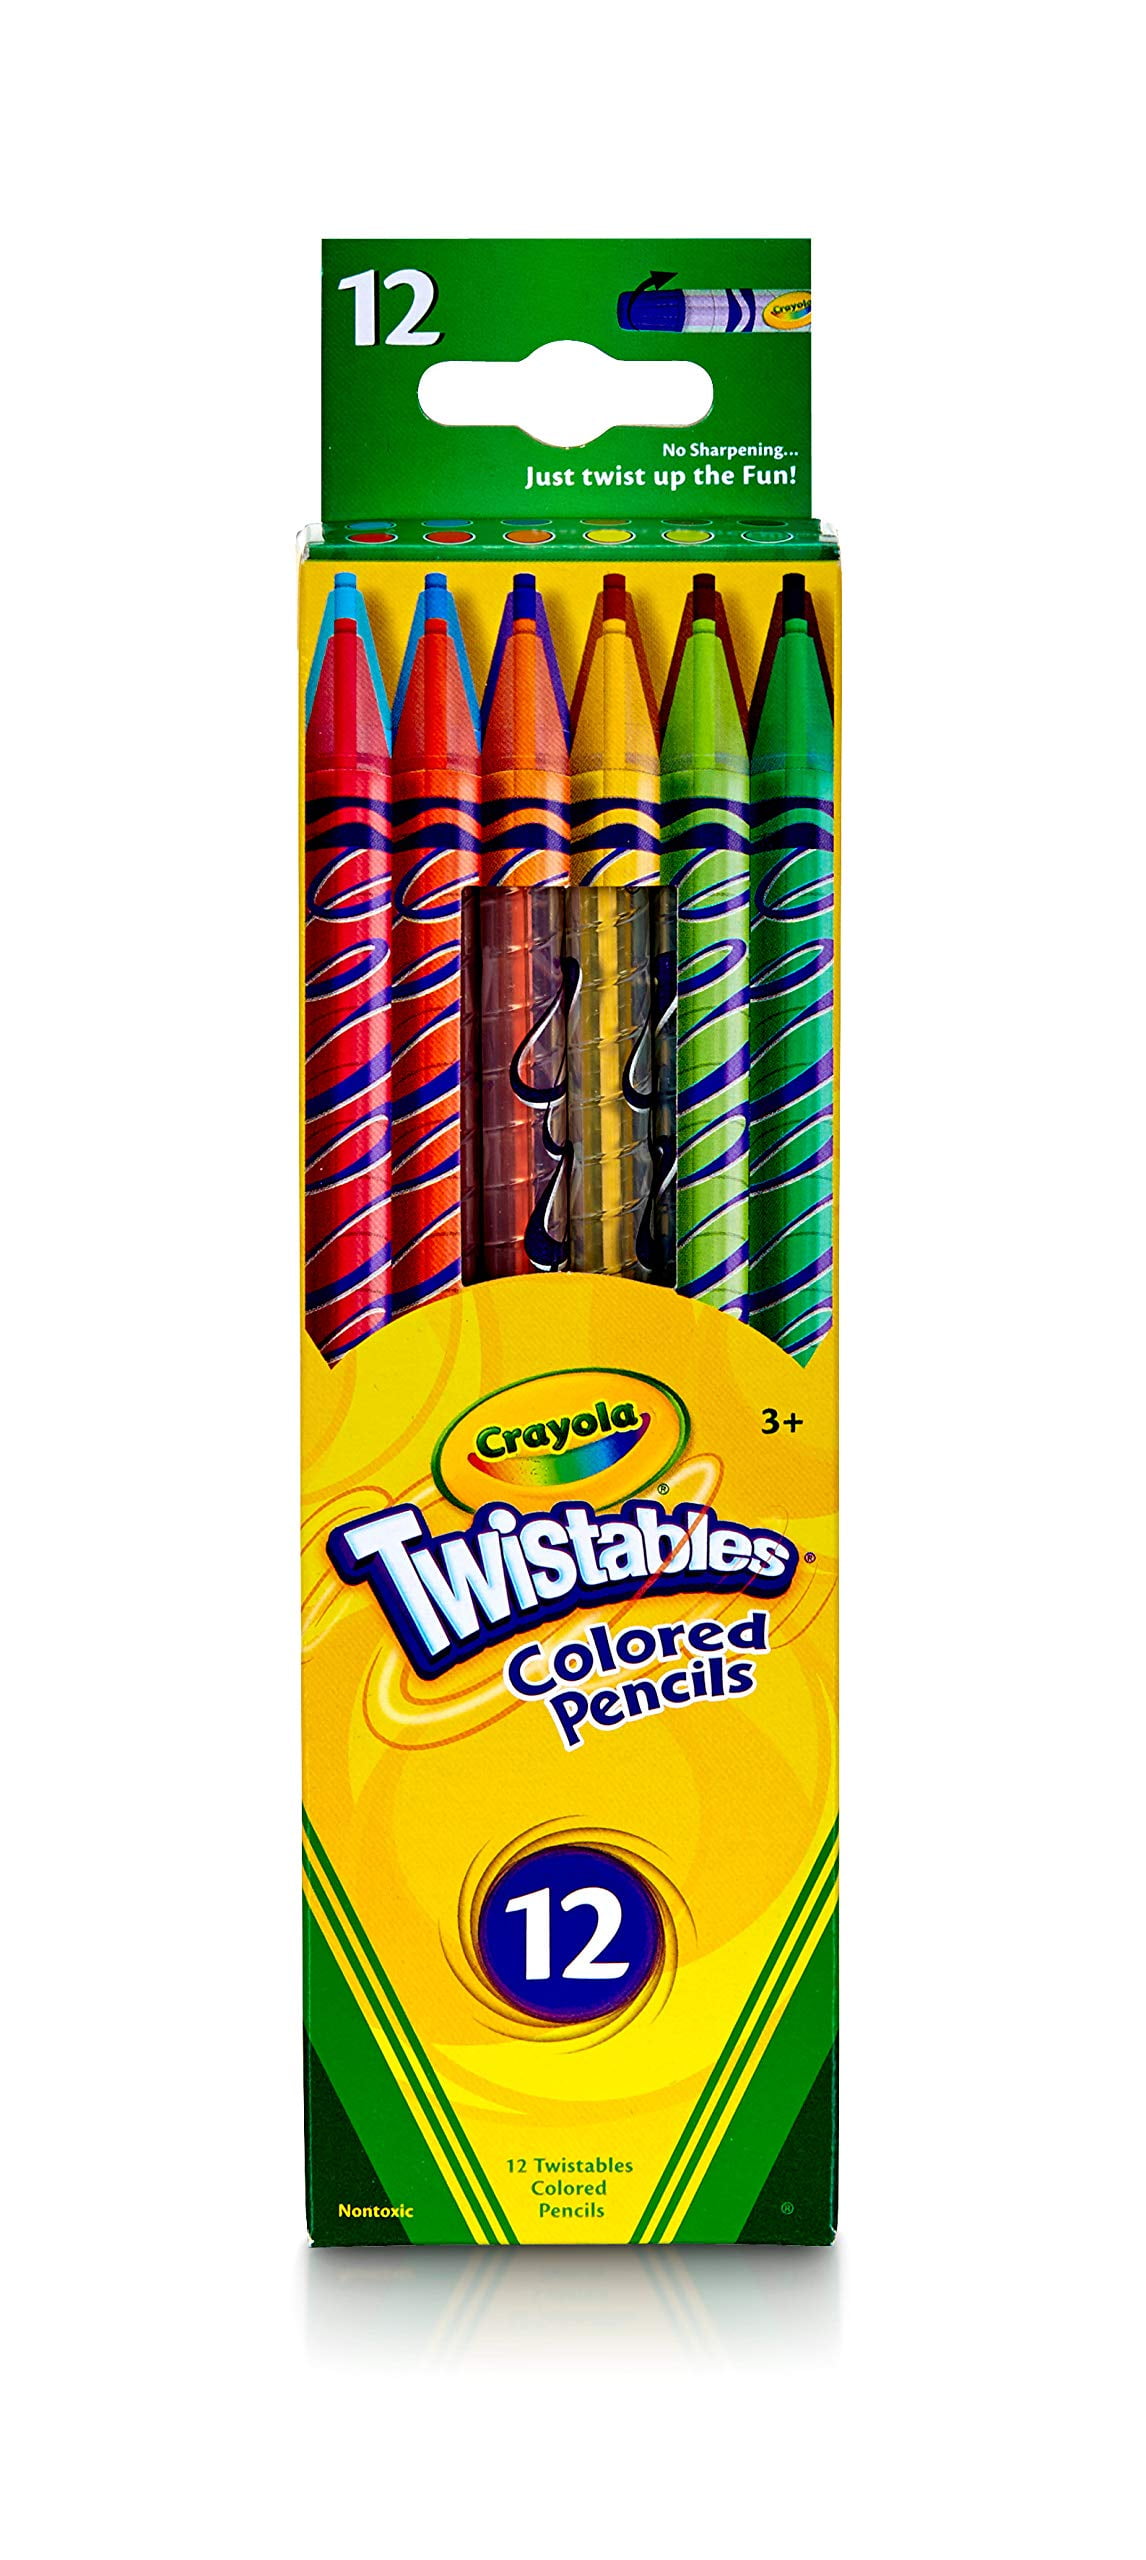  Crayola Twistables Colored Pencils, Gift for Kids, 12ct : Toys  & Games